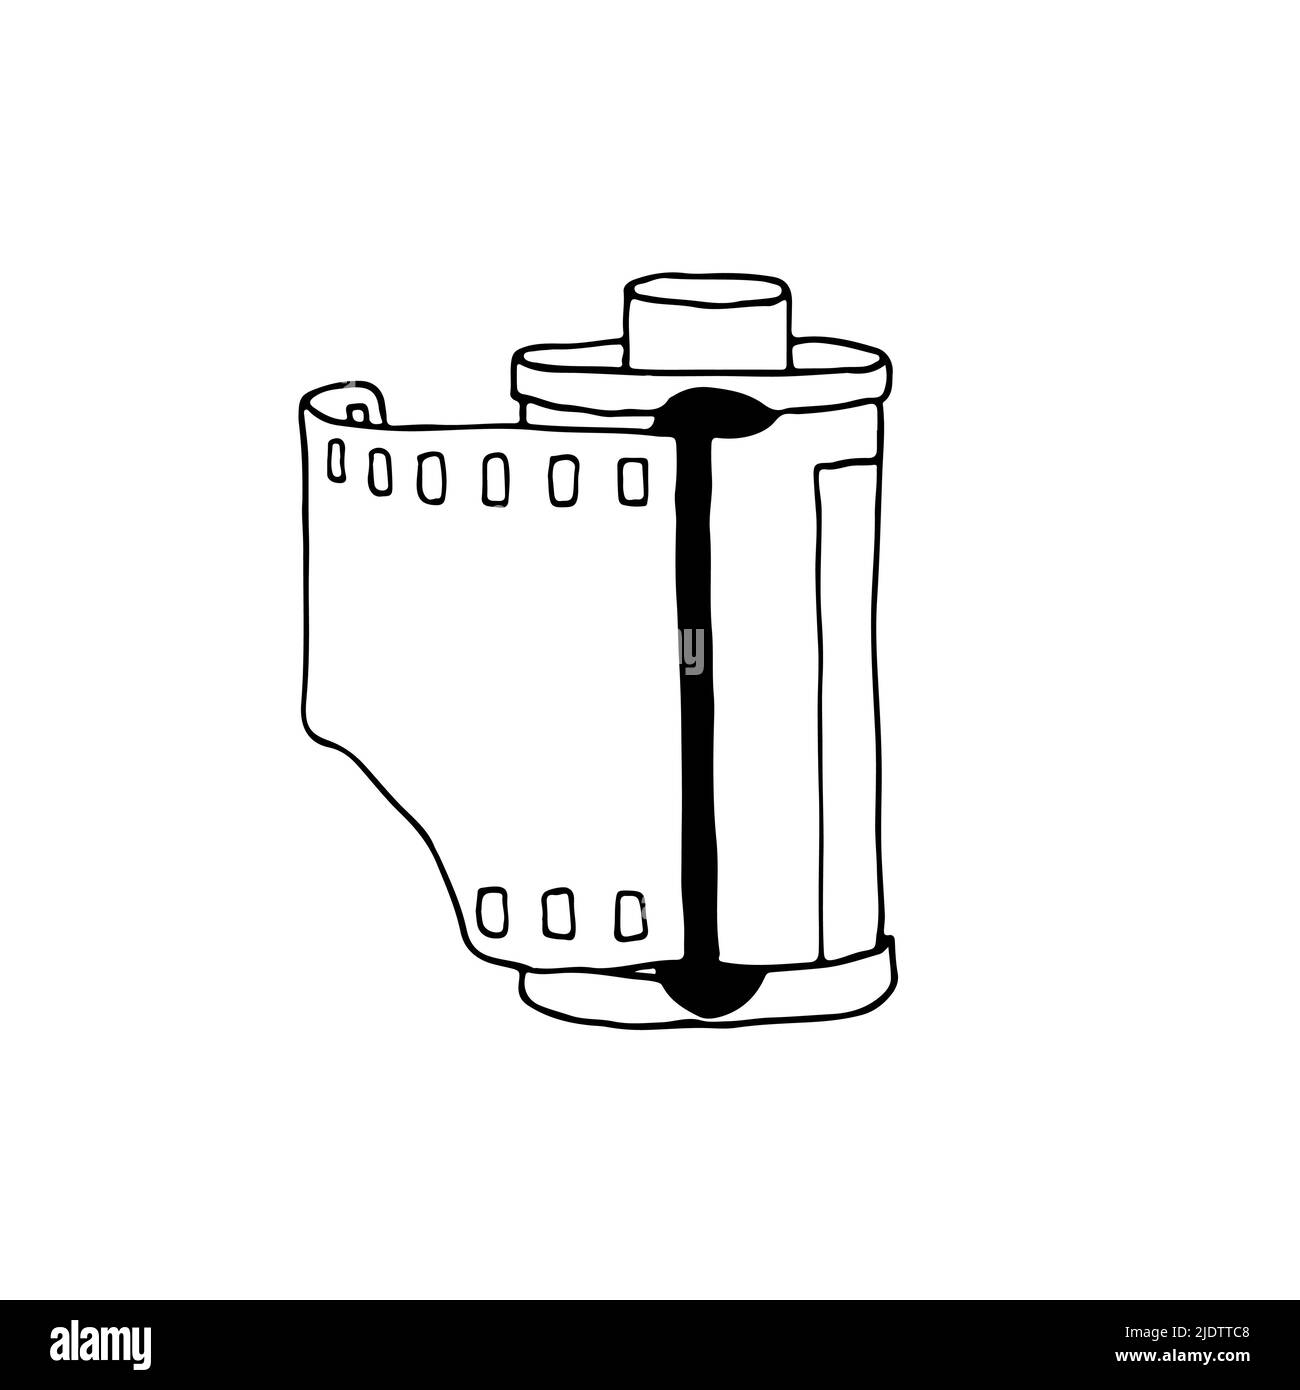 https://c8.alamy.com/comp/2JDTTC8/camera-film-roll-in-case-hand-drawn-vector-illustration-isolated-on-a-white-background-2JDTTC8.jpg